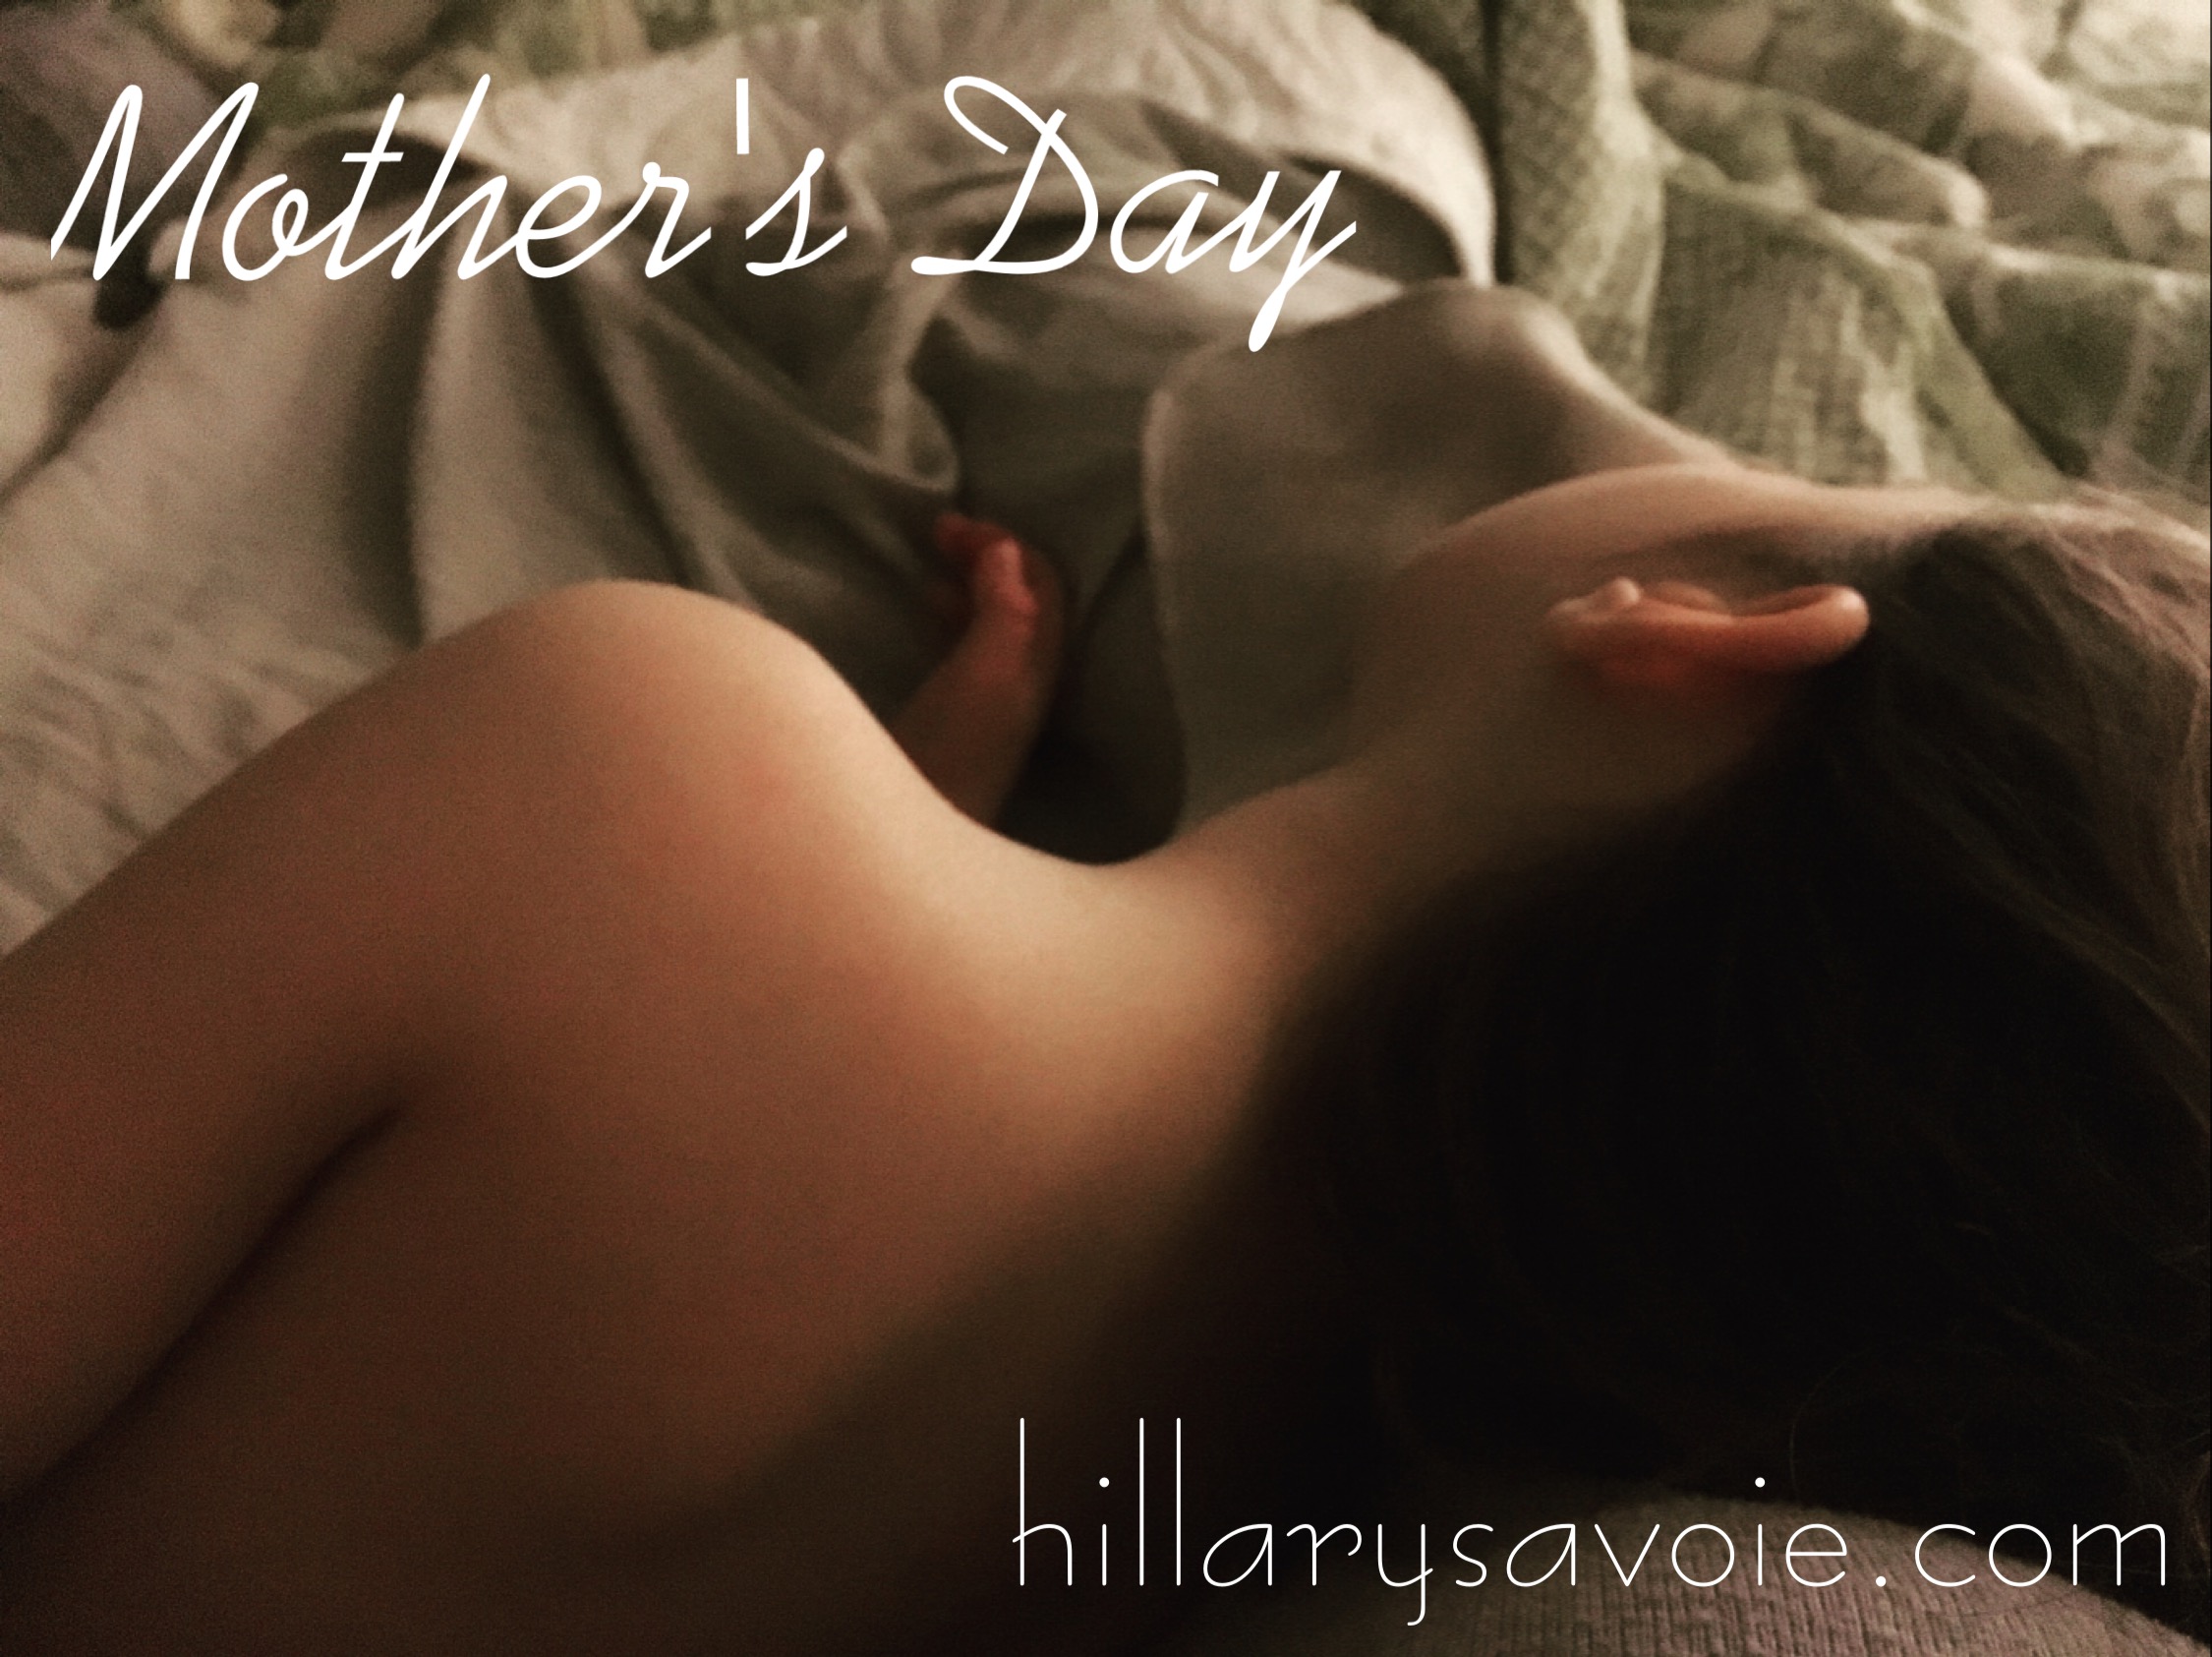 Mother’s Day: A Finish the Sentence Friday Post